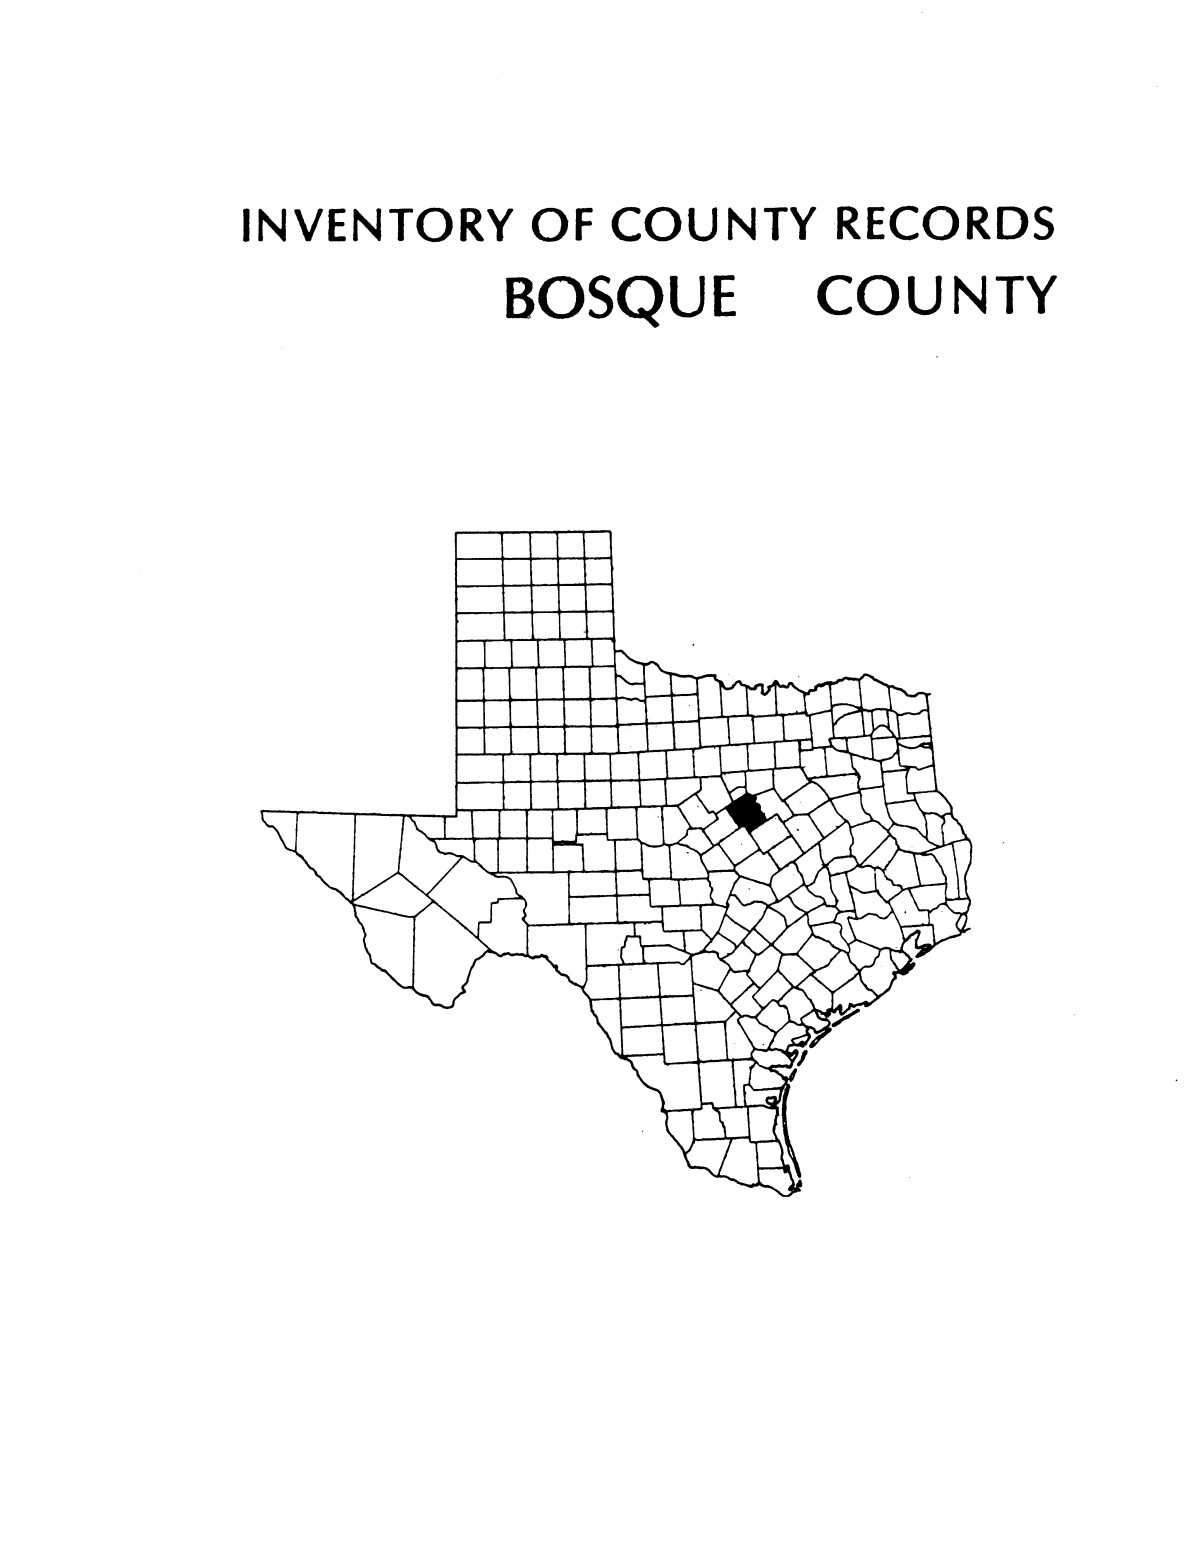 Inventory of county records Bosque County courthouse Meridian Texas